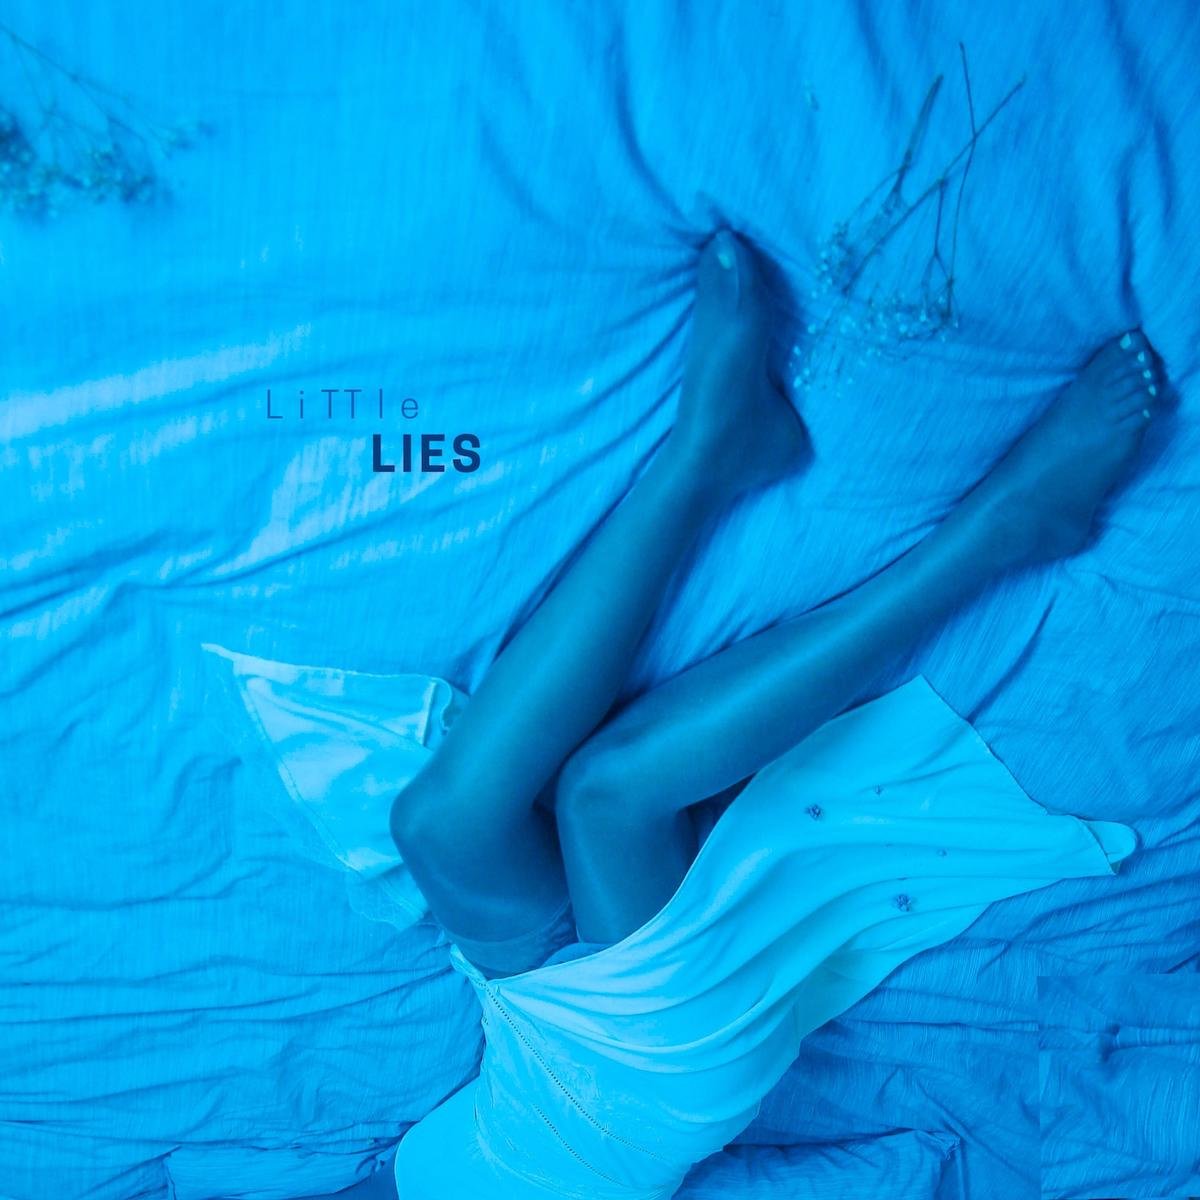 Little Lies by Mighloe